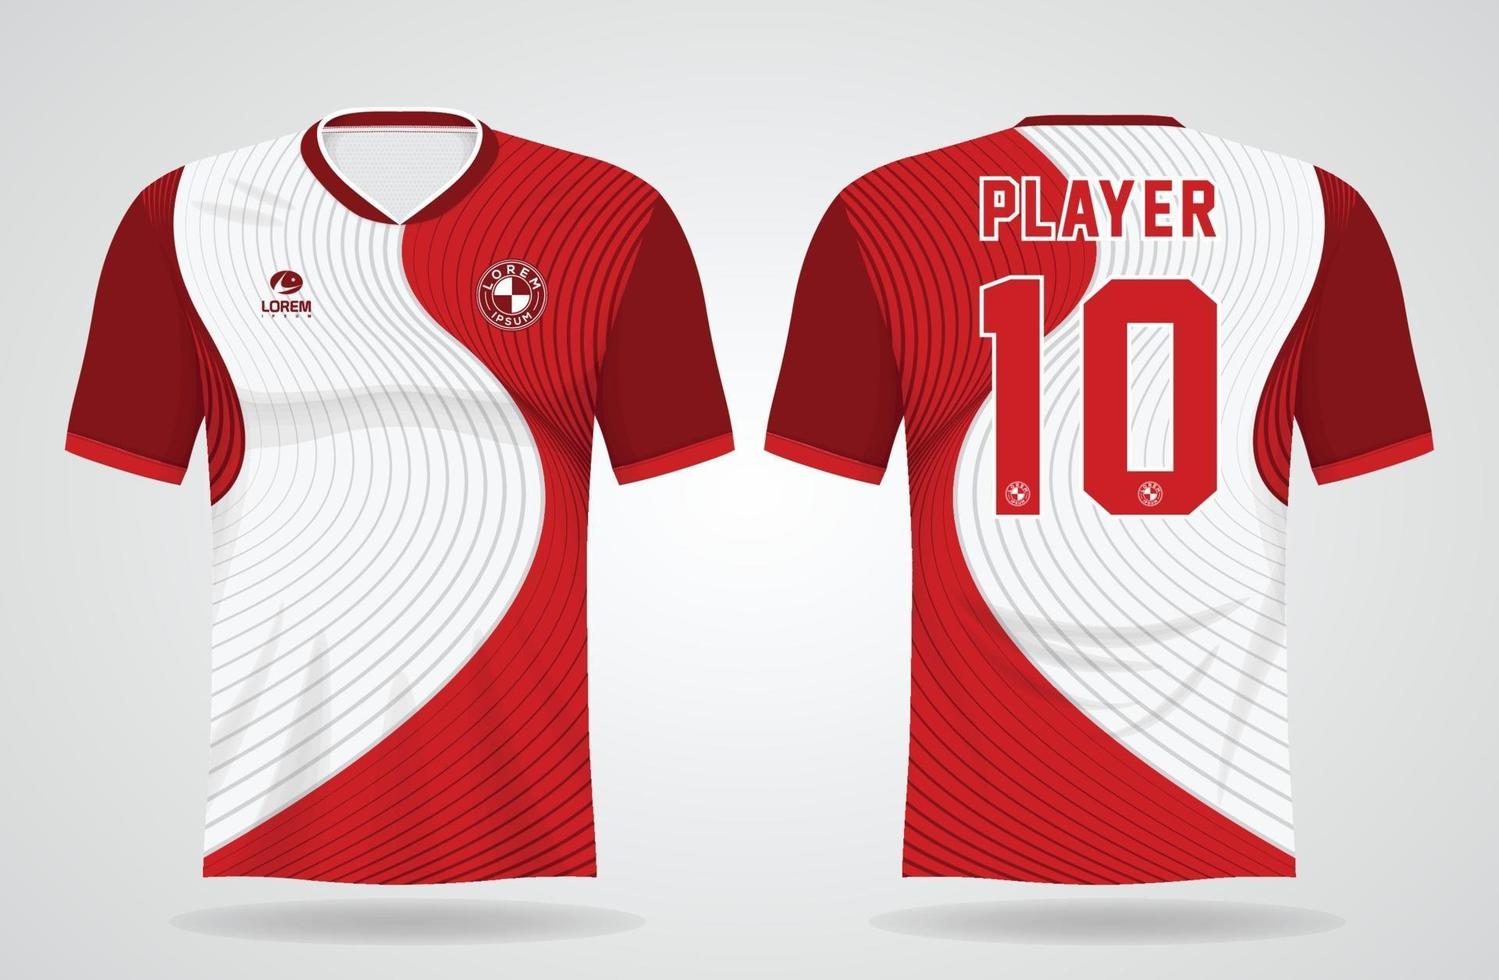 red white sports jersey template for team uniforms and Soccer t shirt design vector